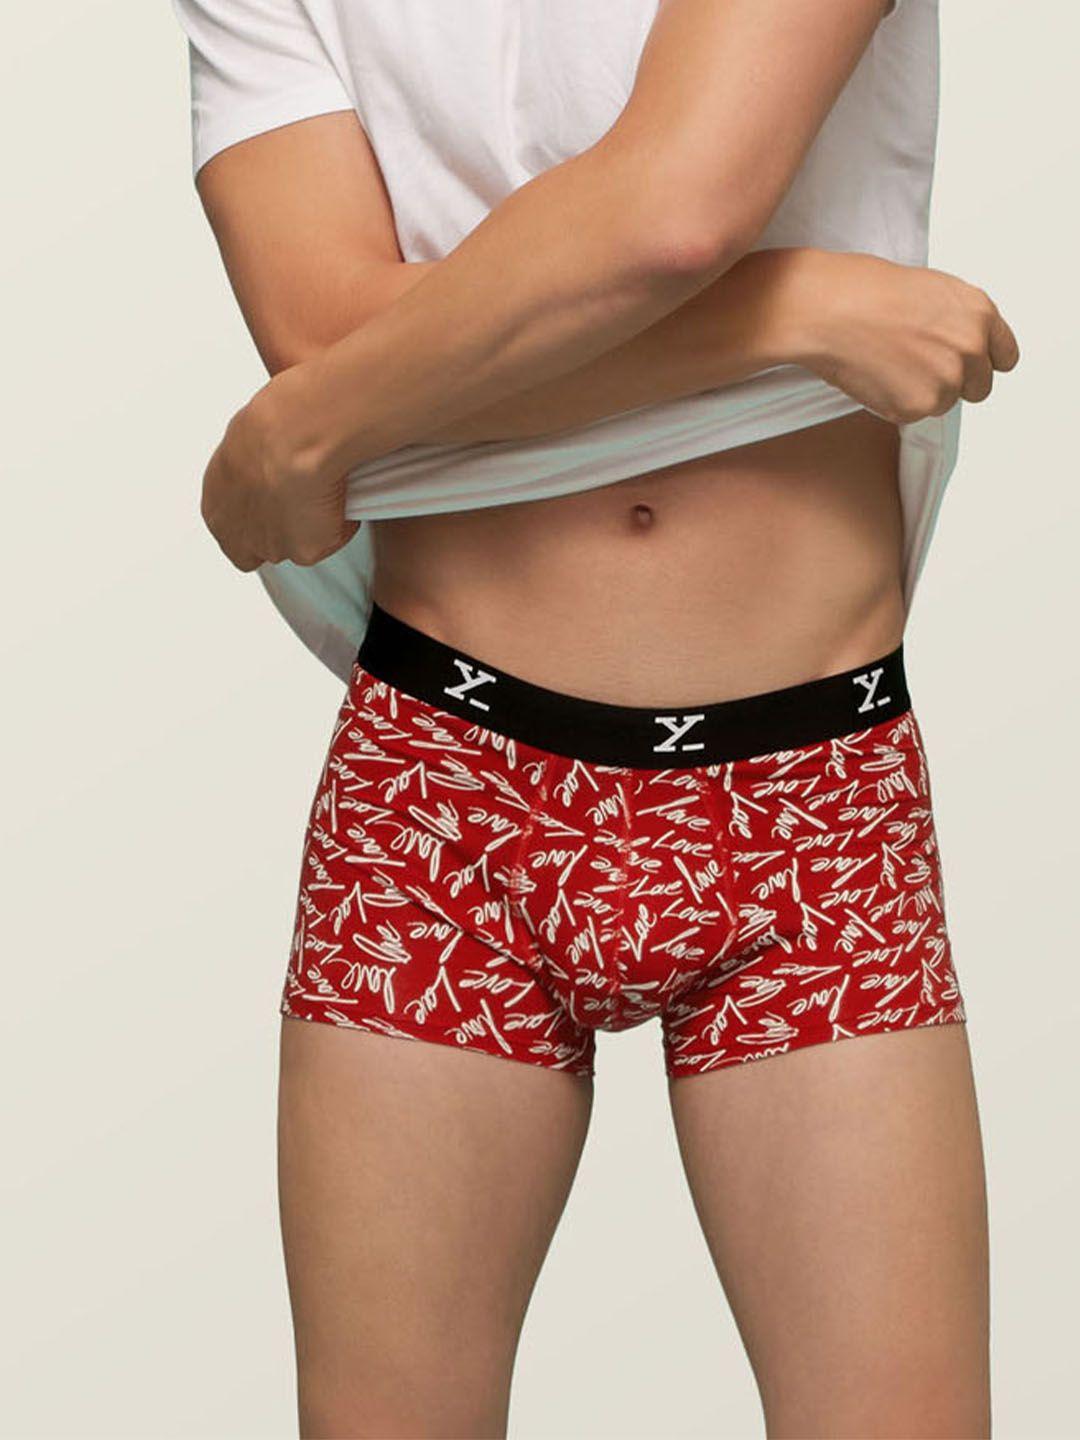 xyxx-men-red-&-white-printed-shuffle-intellisoft-antimicrobial-micro-modal-trunks-xytrnk86